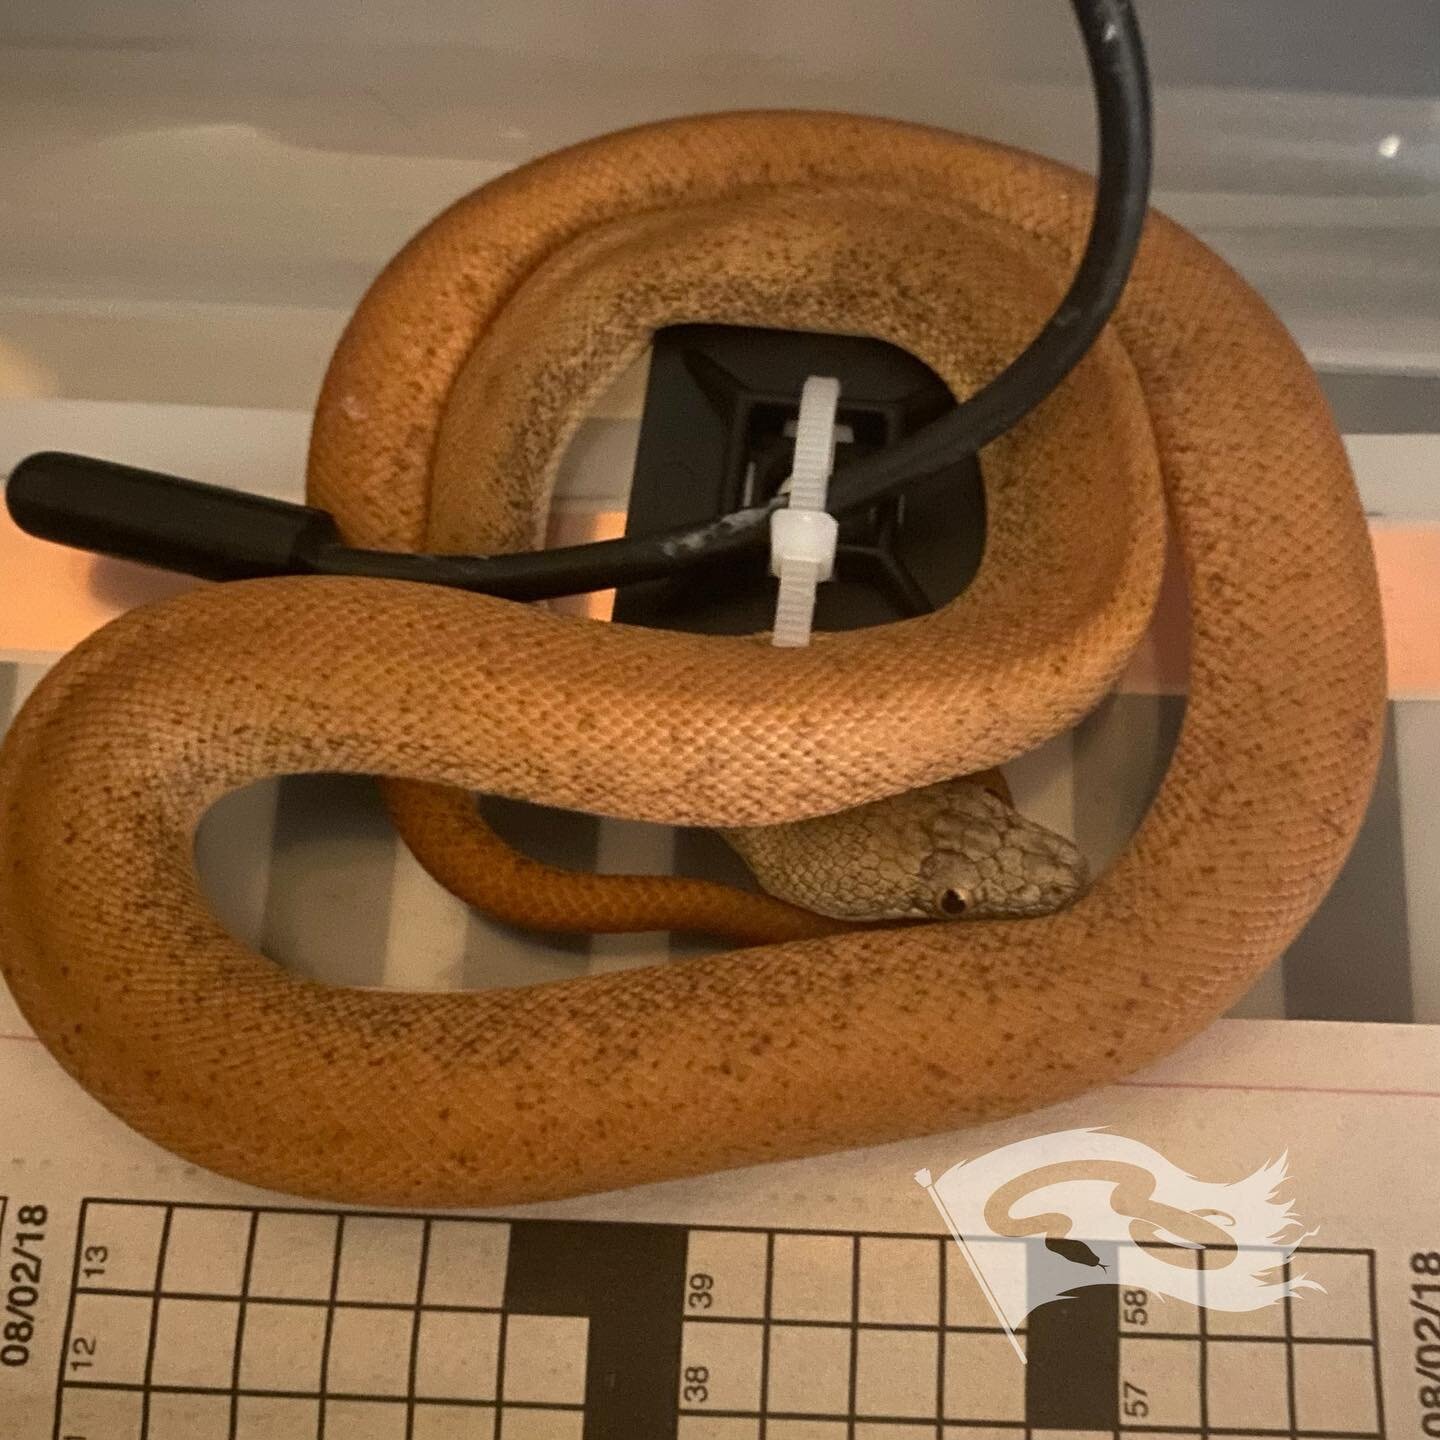 It&rsquo;s so hard to gets pics of these guys they just won&rsquo;t stop moving. 1.1 savus hanging out in quarantine for the time being awesome little python. That makes 5 for liasis!

#moreliapythonradionetwork #moreliapythonradio #roguereptiles #sa